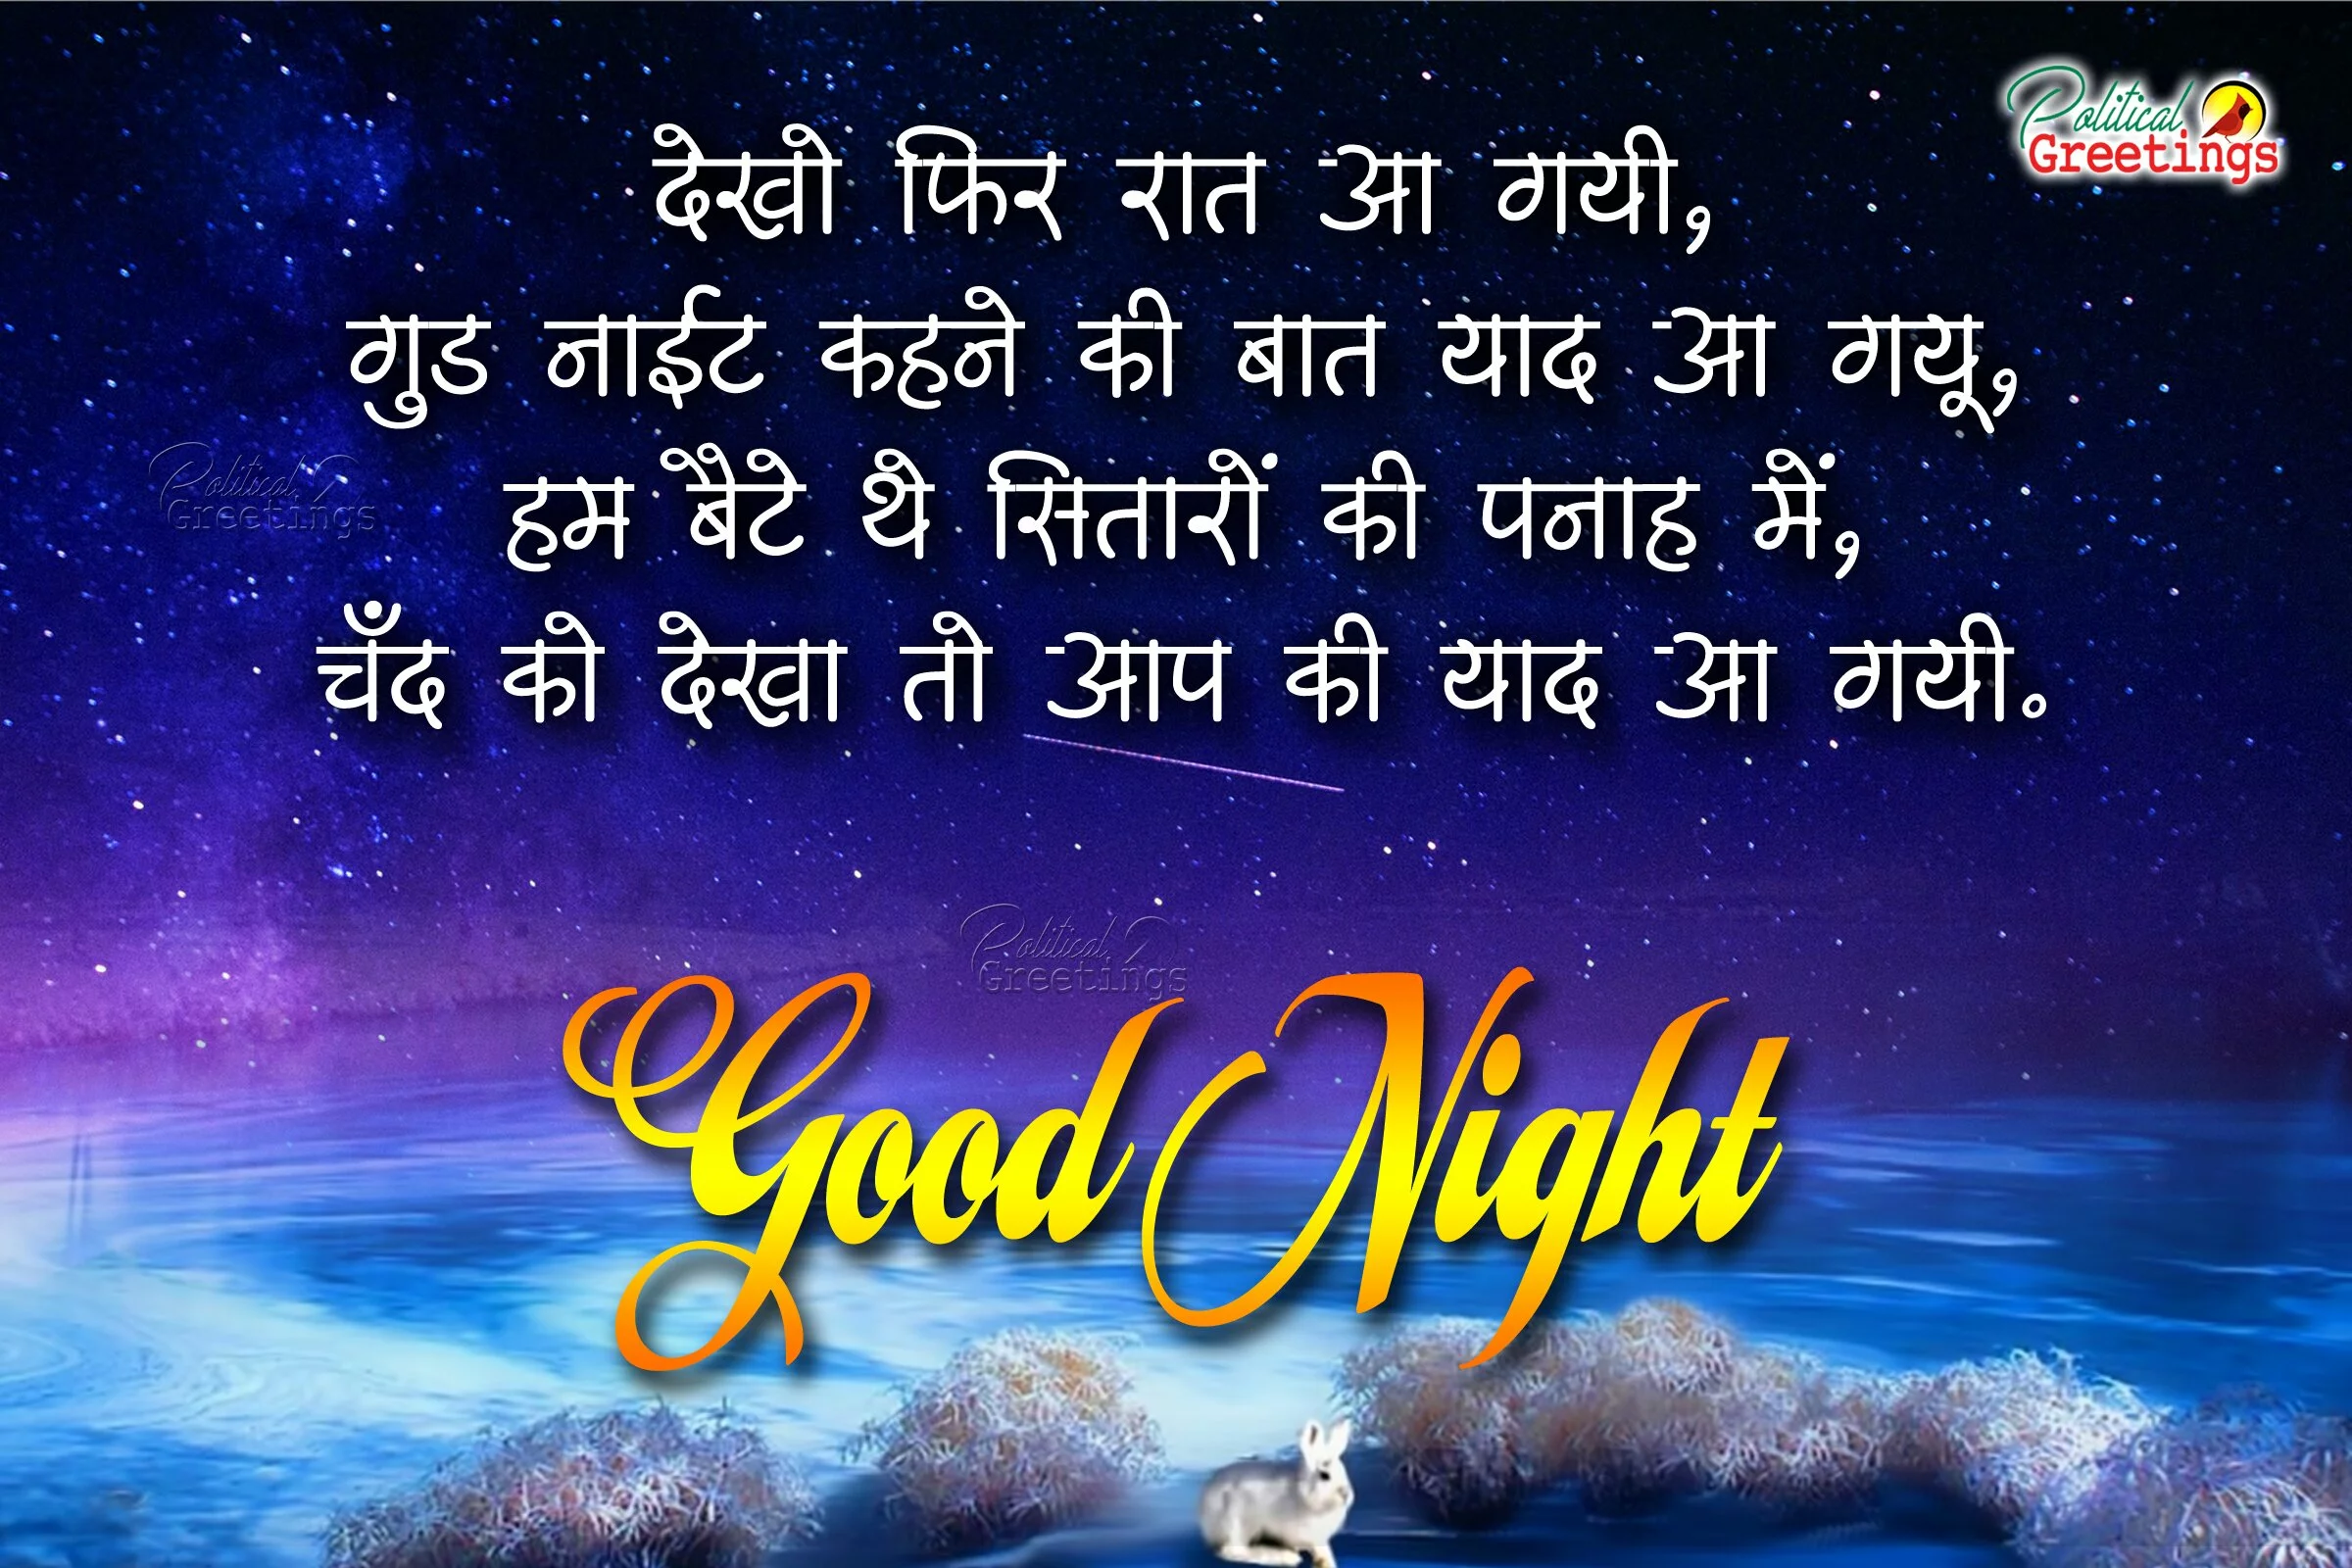 Good-Night-Hindi-quotes-images-pictures-wallpapers-photos